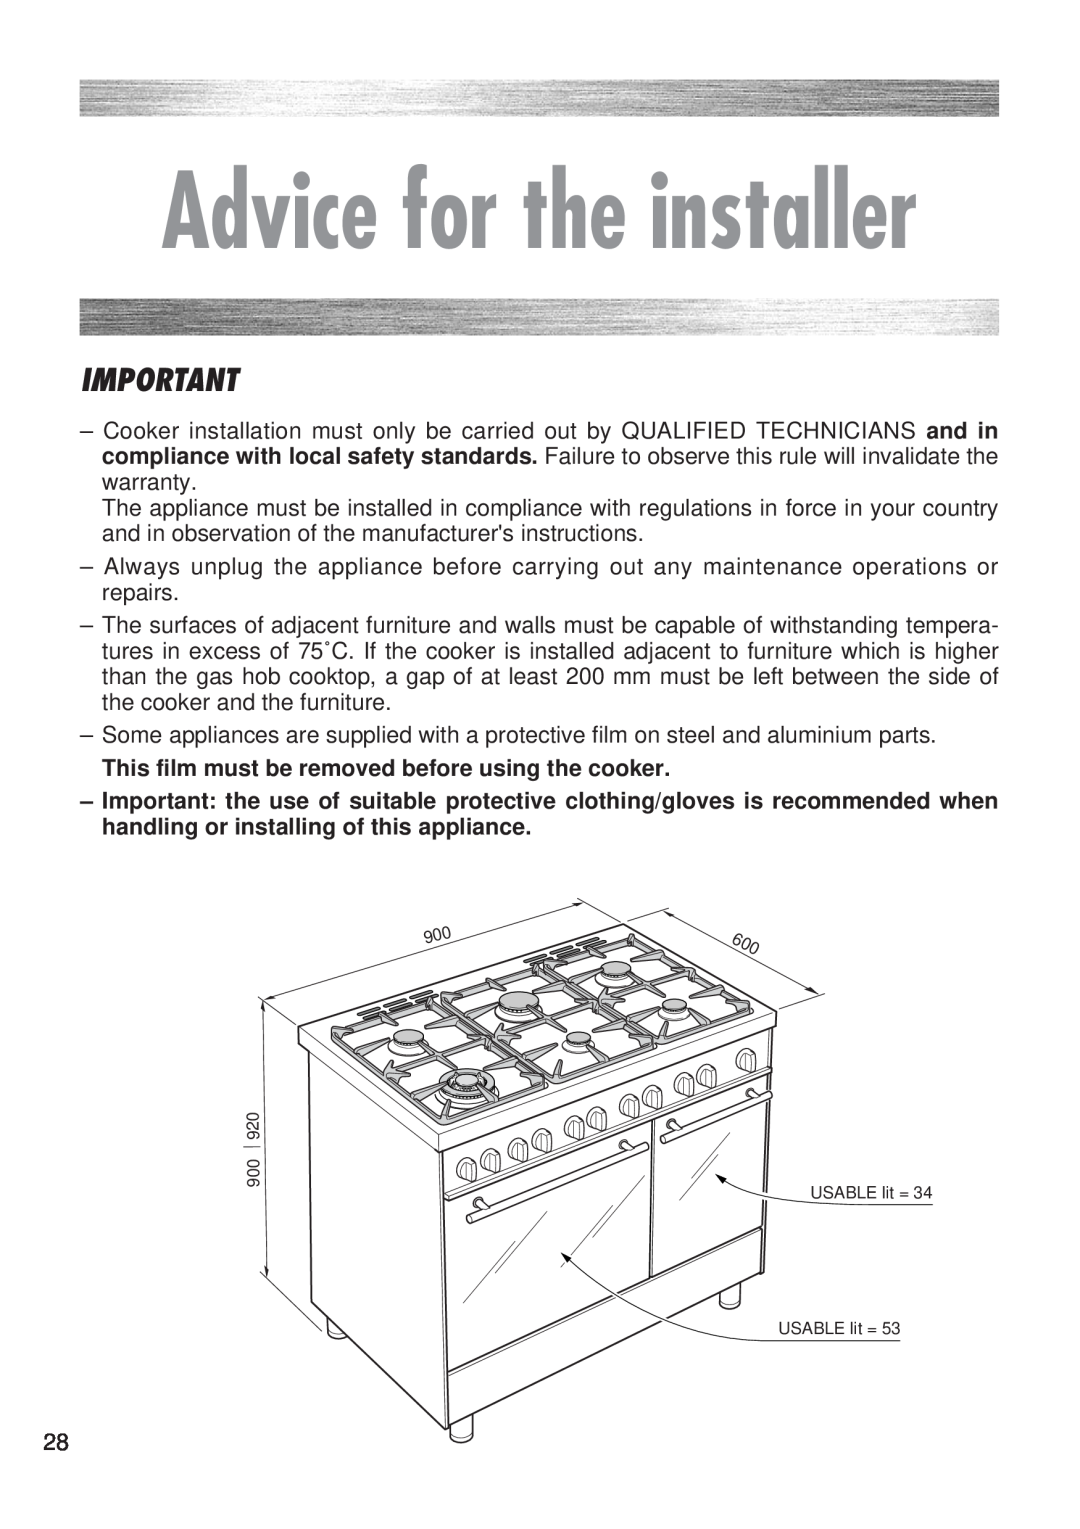 Kenwood CK 300 manual Advice for the installer, This film must be removed before using the cooker 